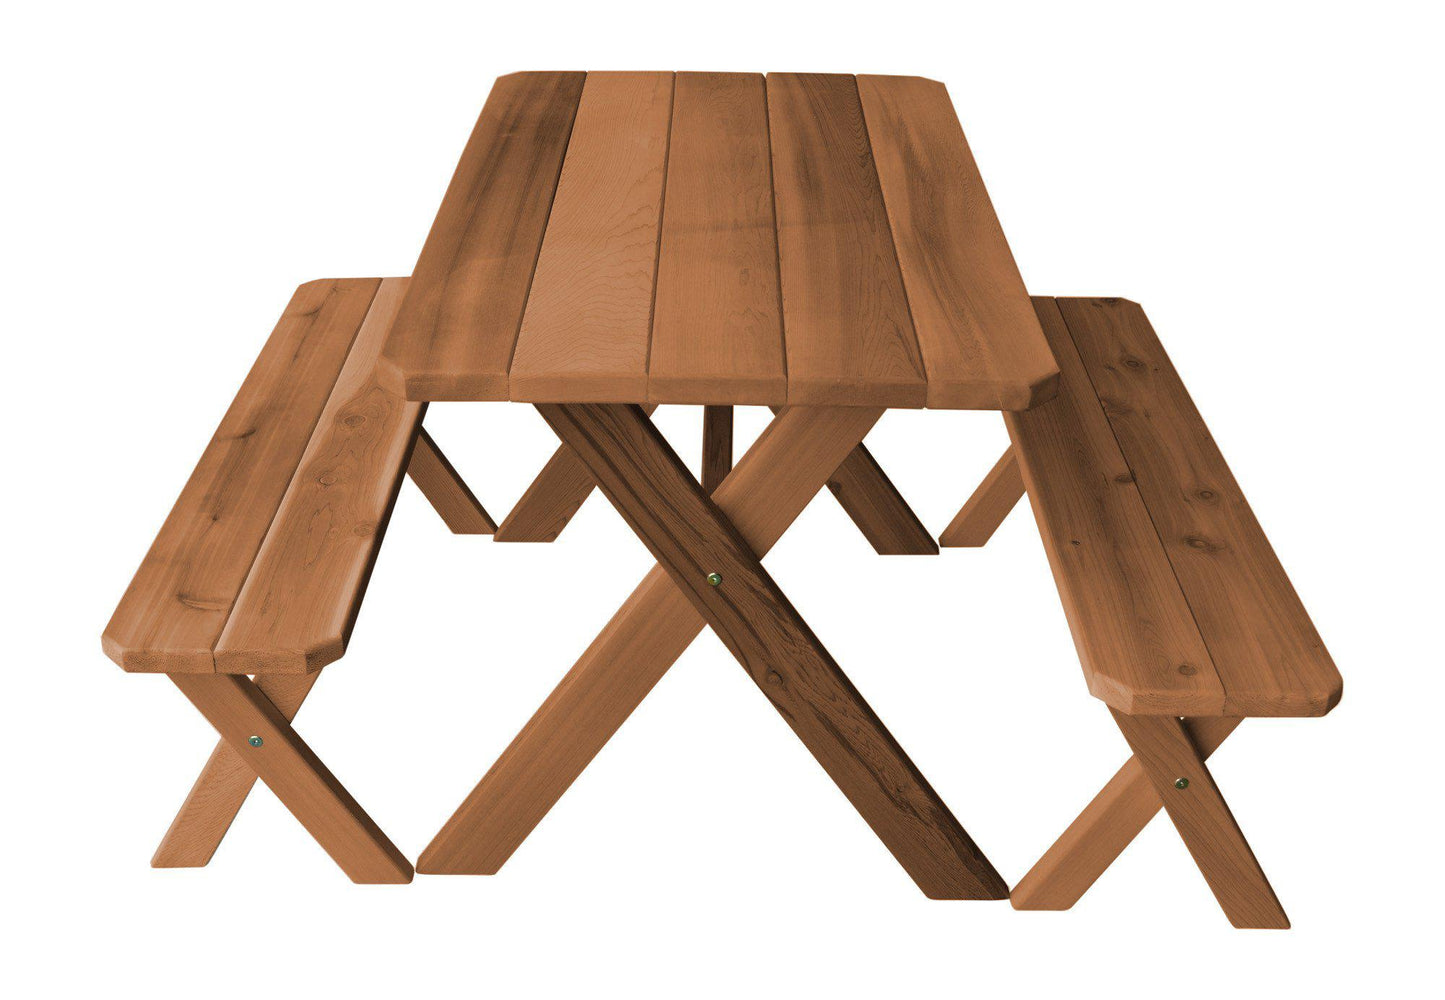 A&L FURNITURE CO. Western Red Cedar 4' Cross-leg Table w/2 Benches - Specify for FREE 2" Umbrella Hole - LEAD TIME TO SHIP 4 WEEKS OR LESS